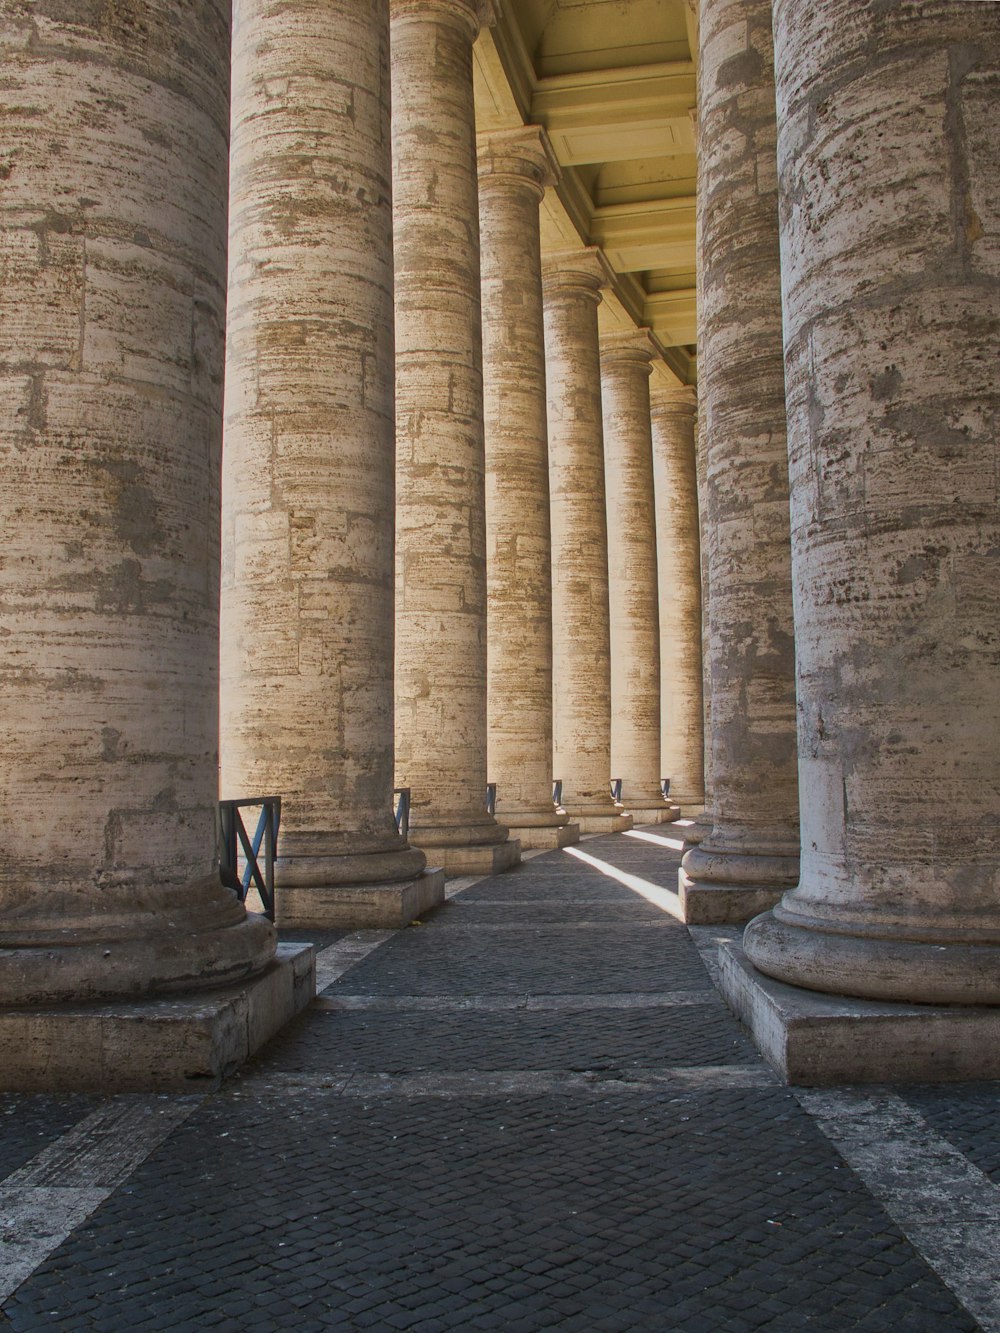 a row of large stone pillars sitting next to each other